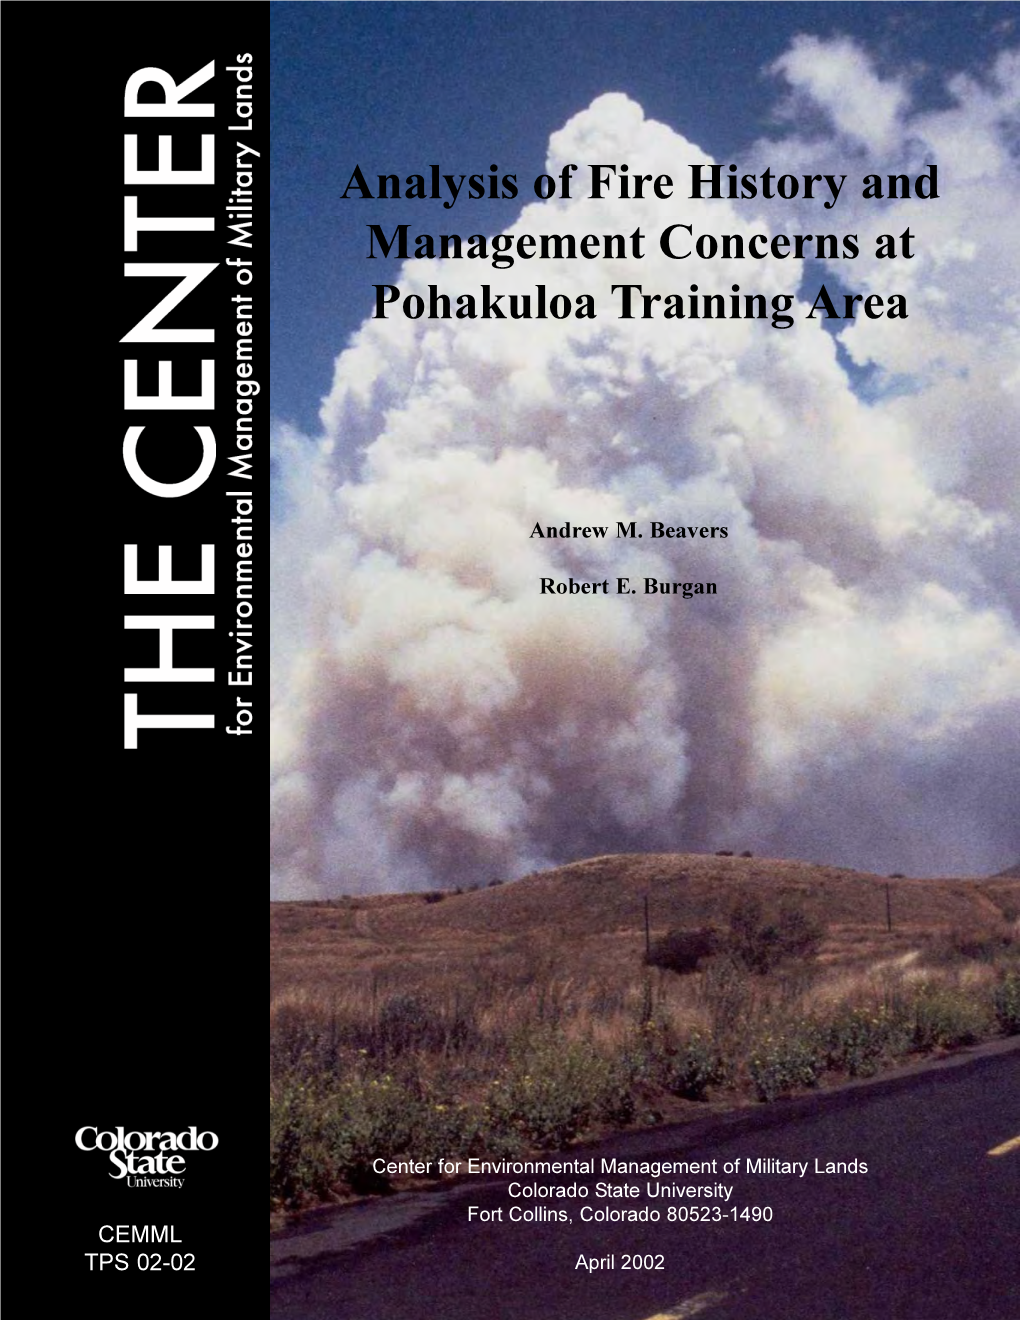 Analysis of Fire History and Management Concerns at Pohakuloa Training Area